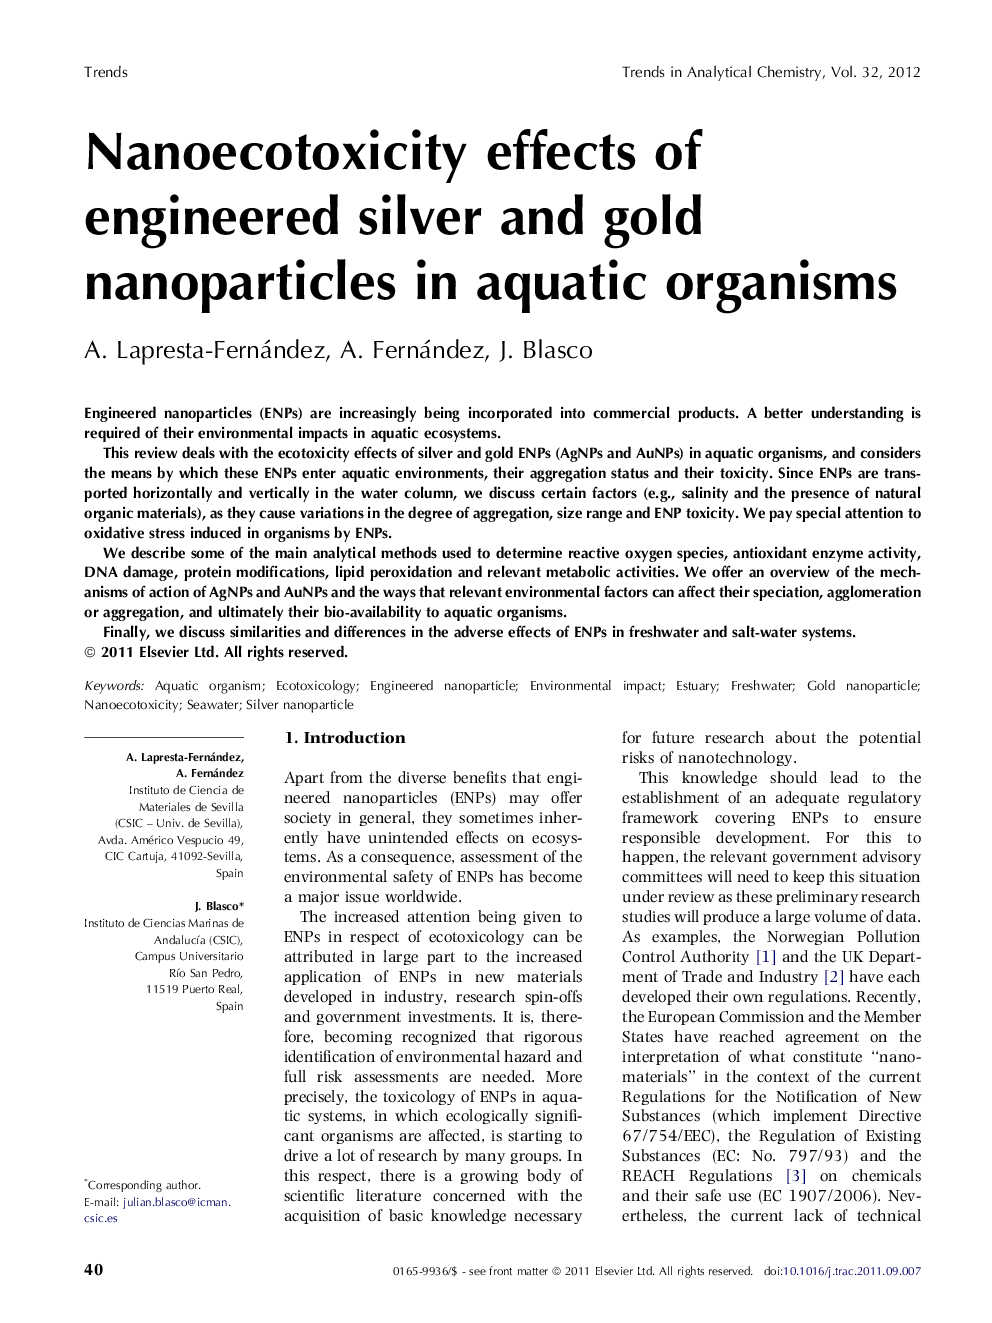 Nanoecotoxicity effects of engineered silver and gold nanoparticles in aquatic organisms